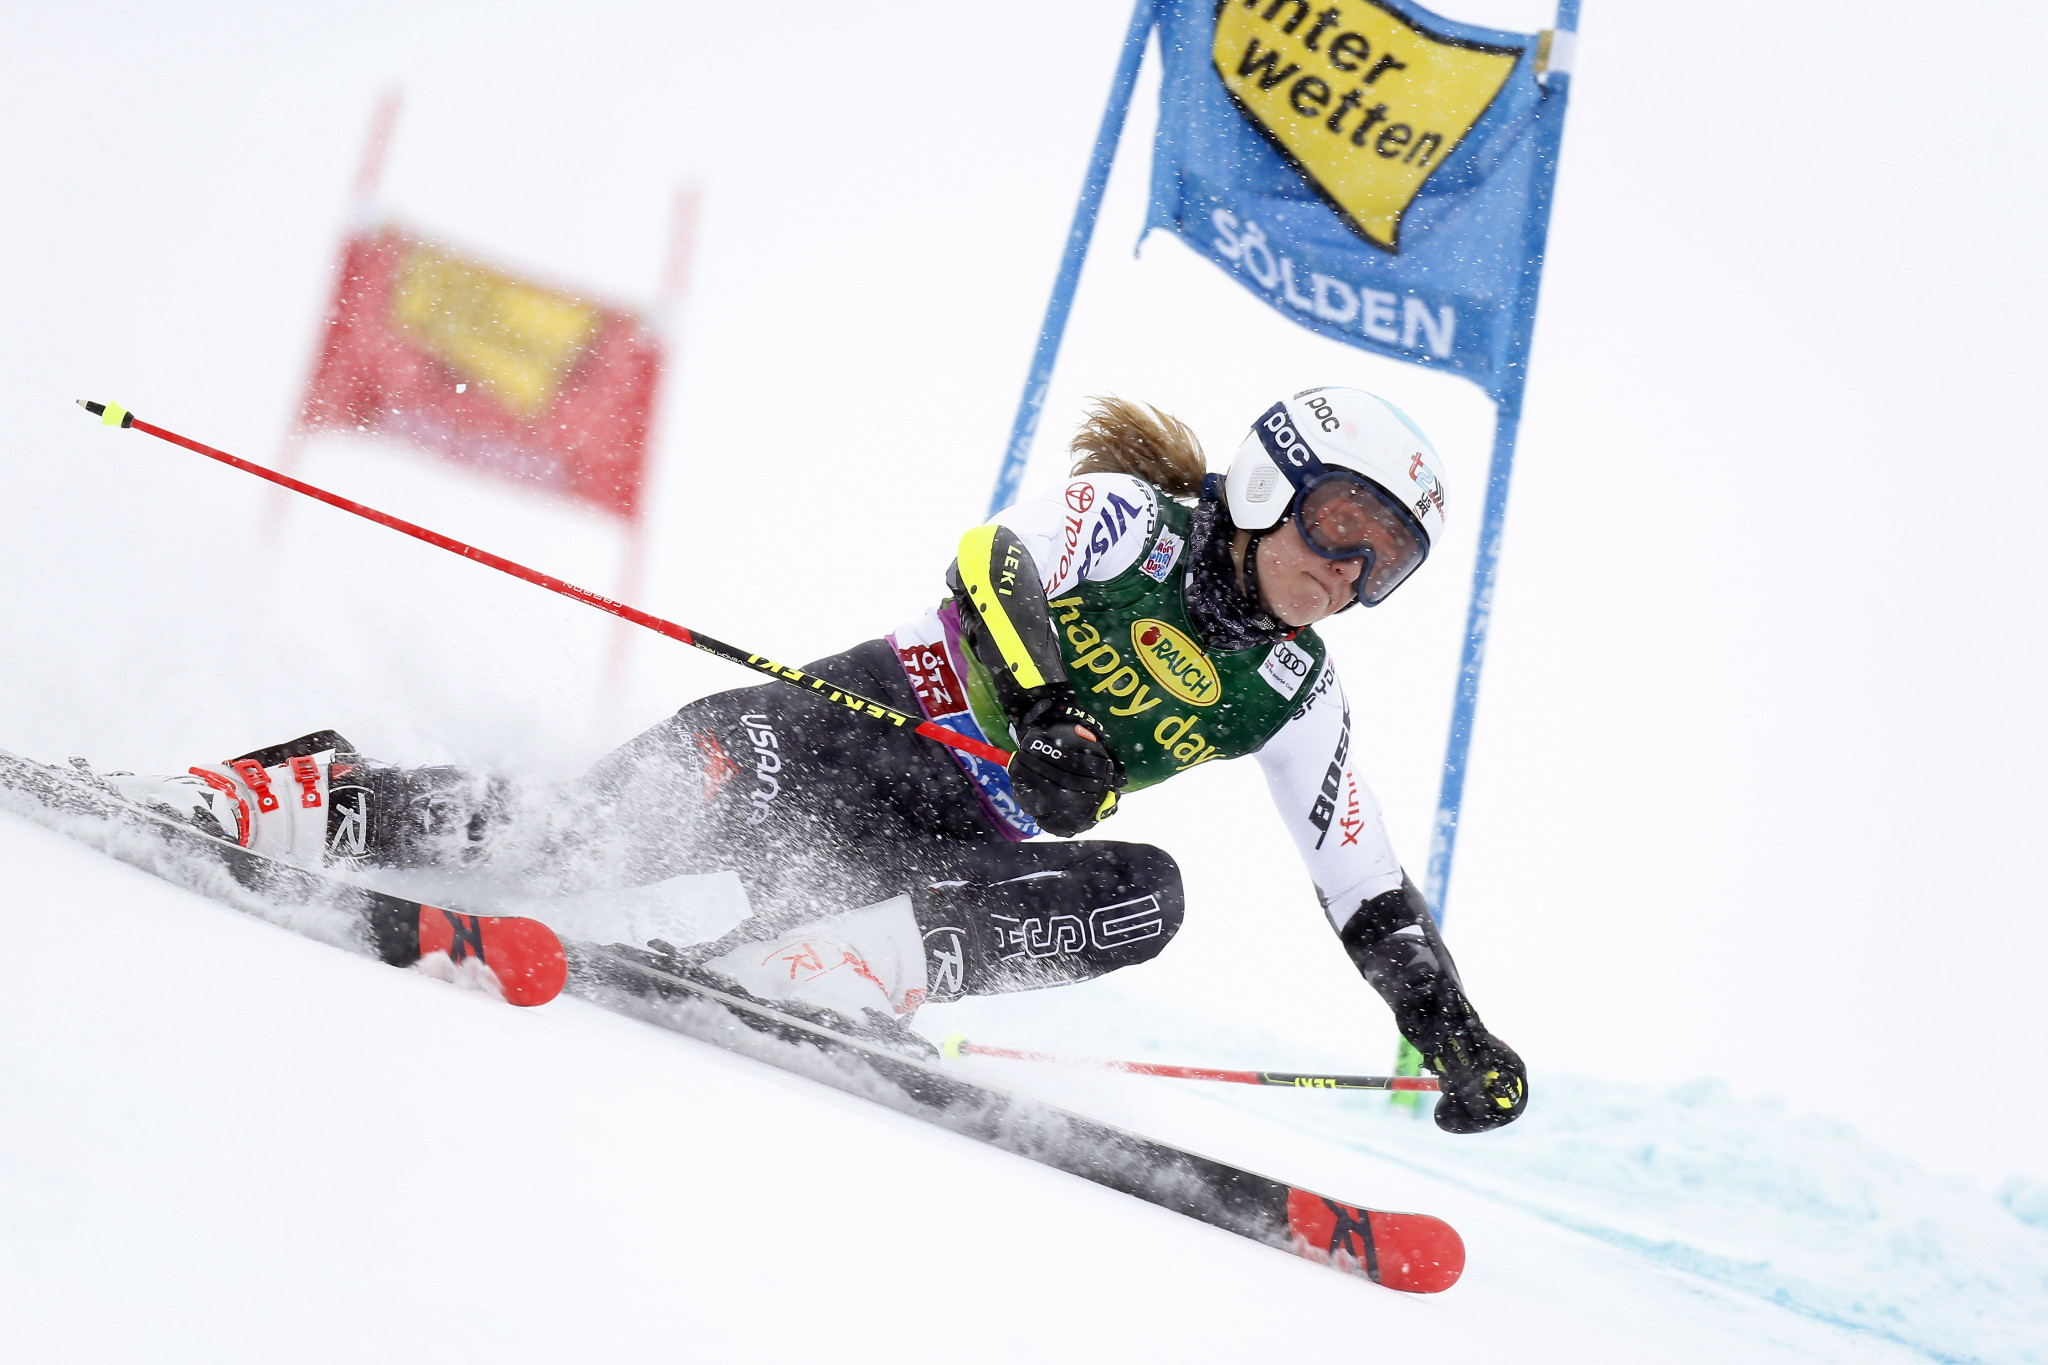 The Alpine Skiing World Cup season begins this weekend in Sölden ©Getty Images